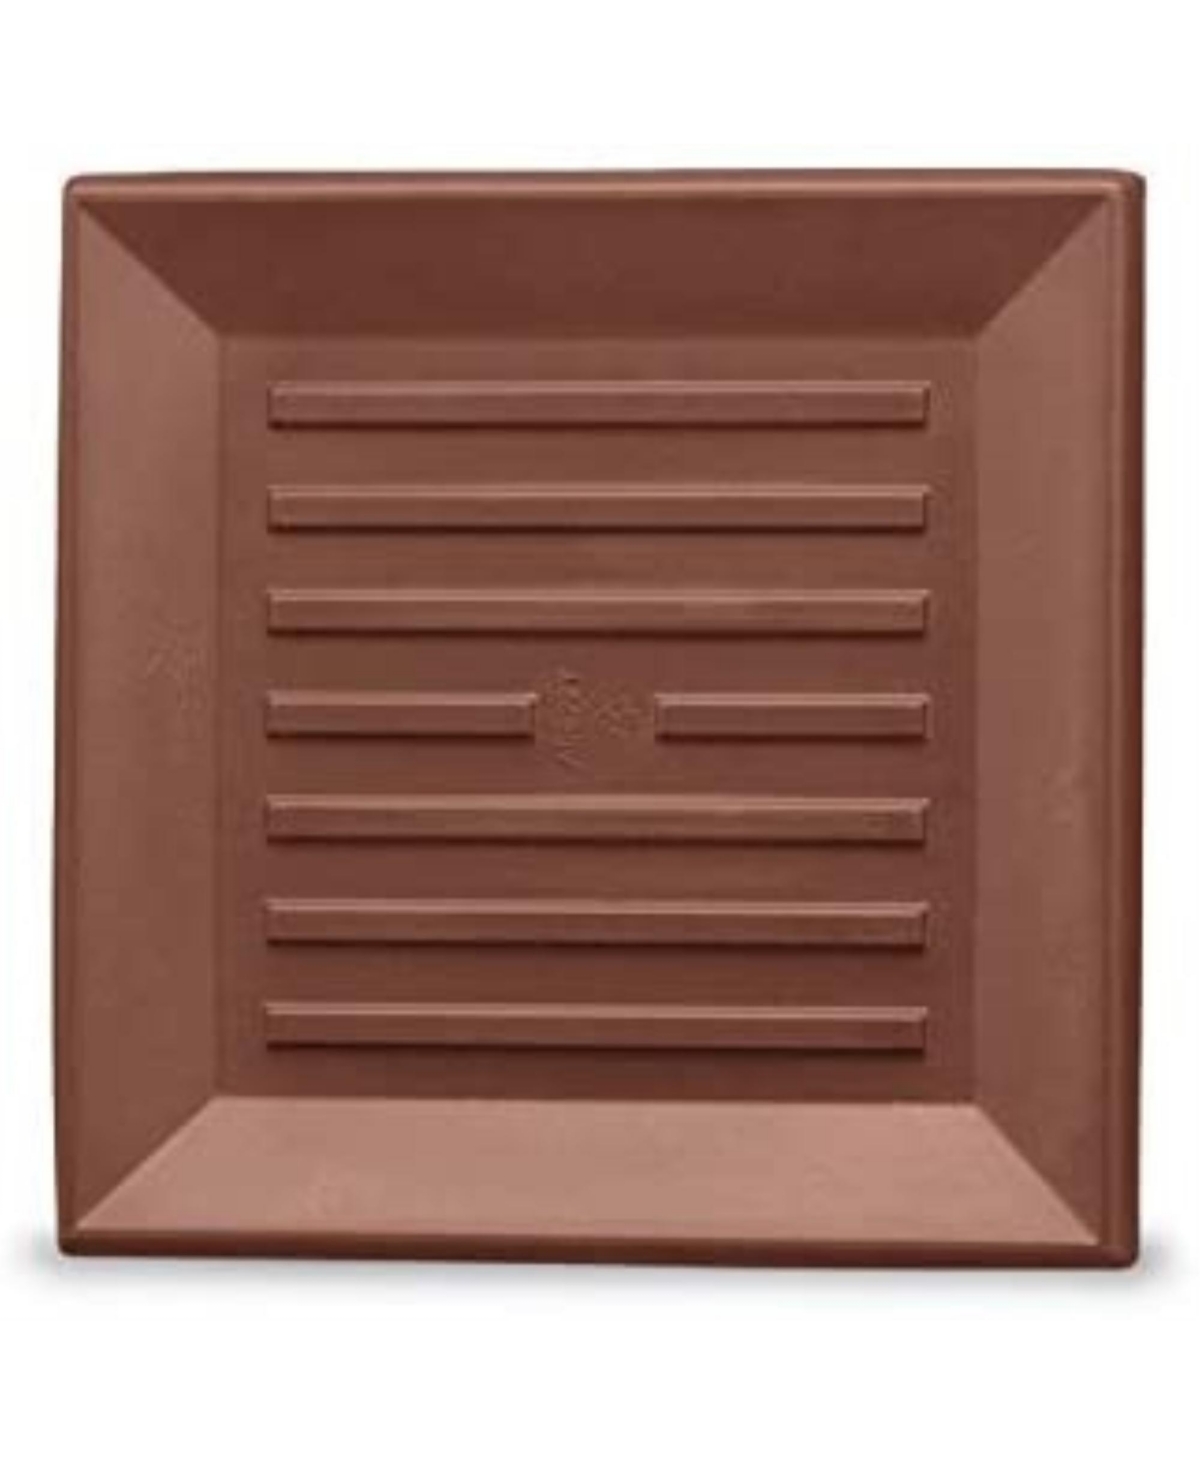 A982200T Drainage Dish Saucer, Square, Rust - 8.75in - Brown